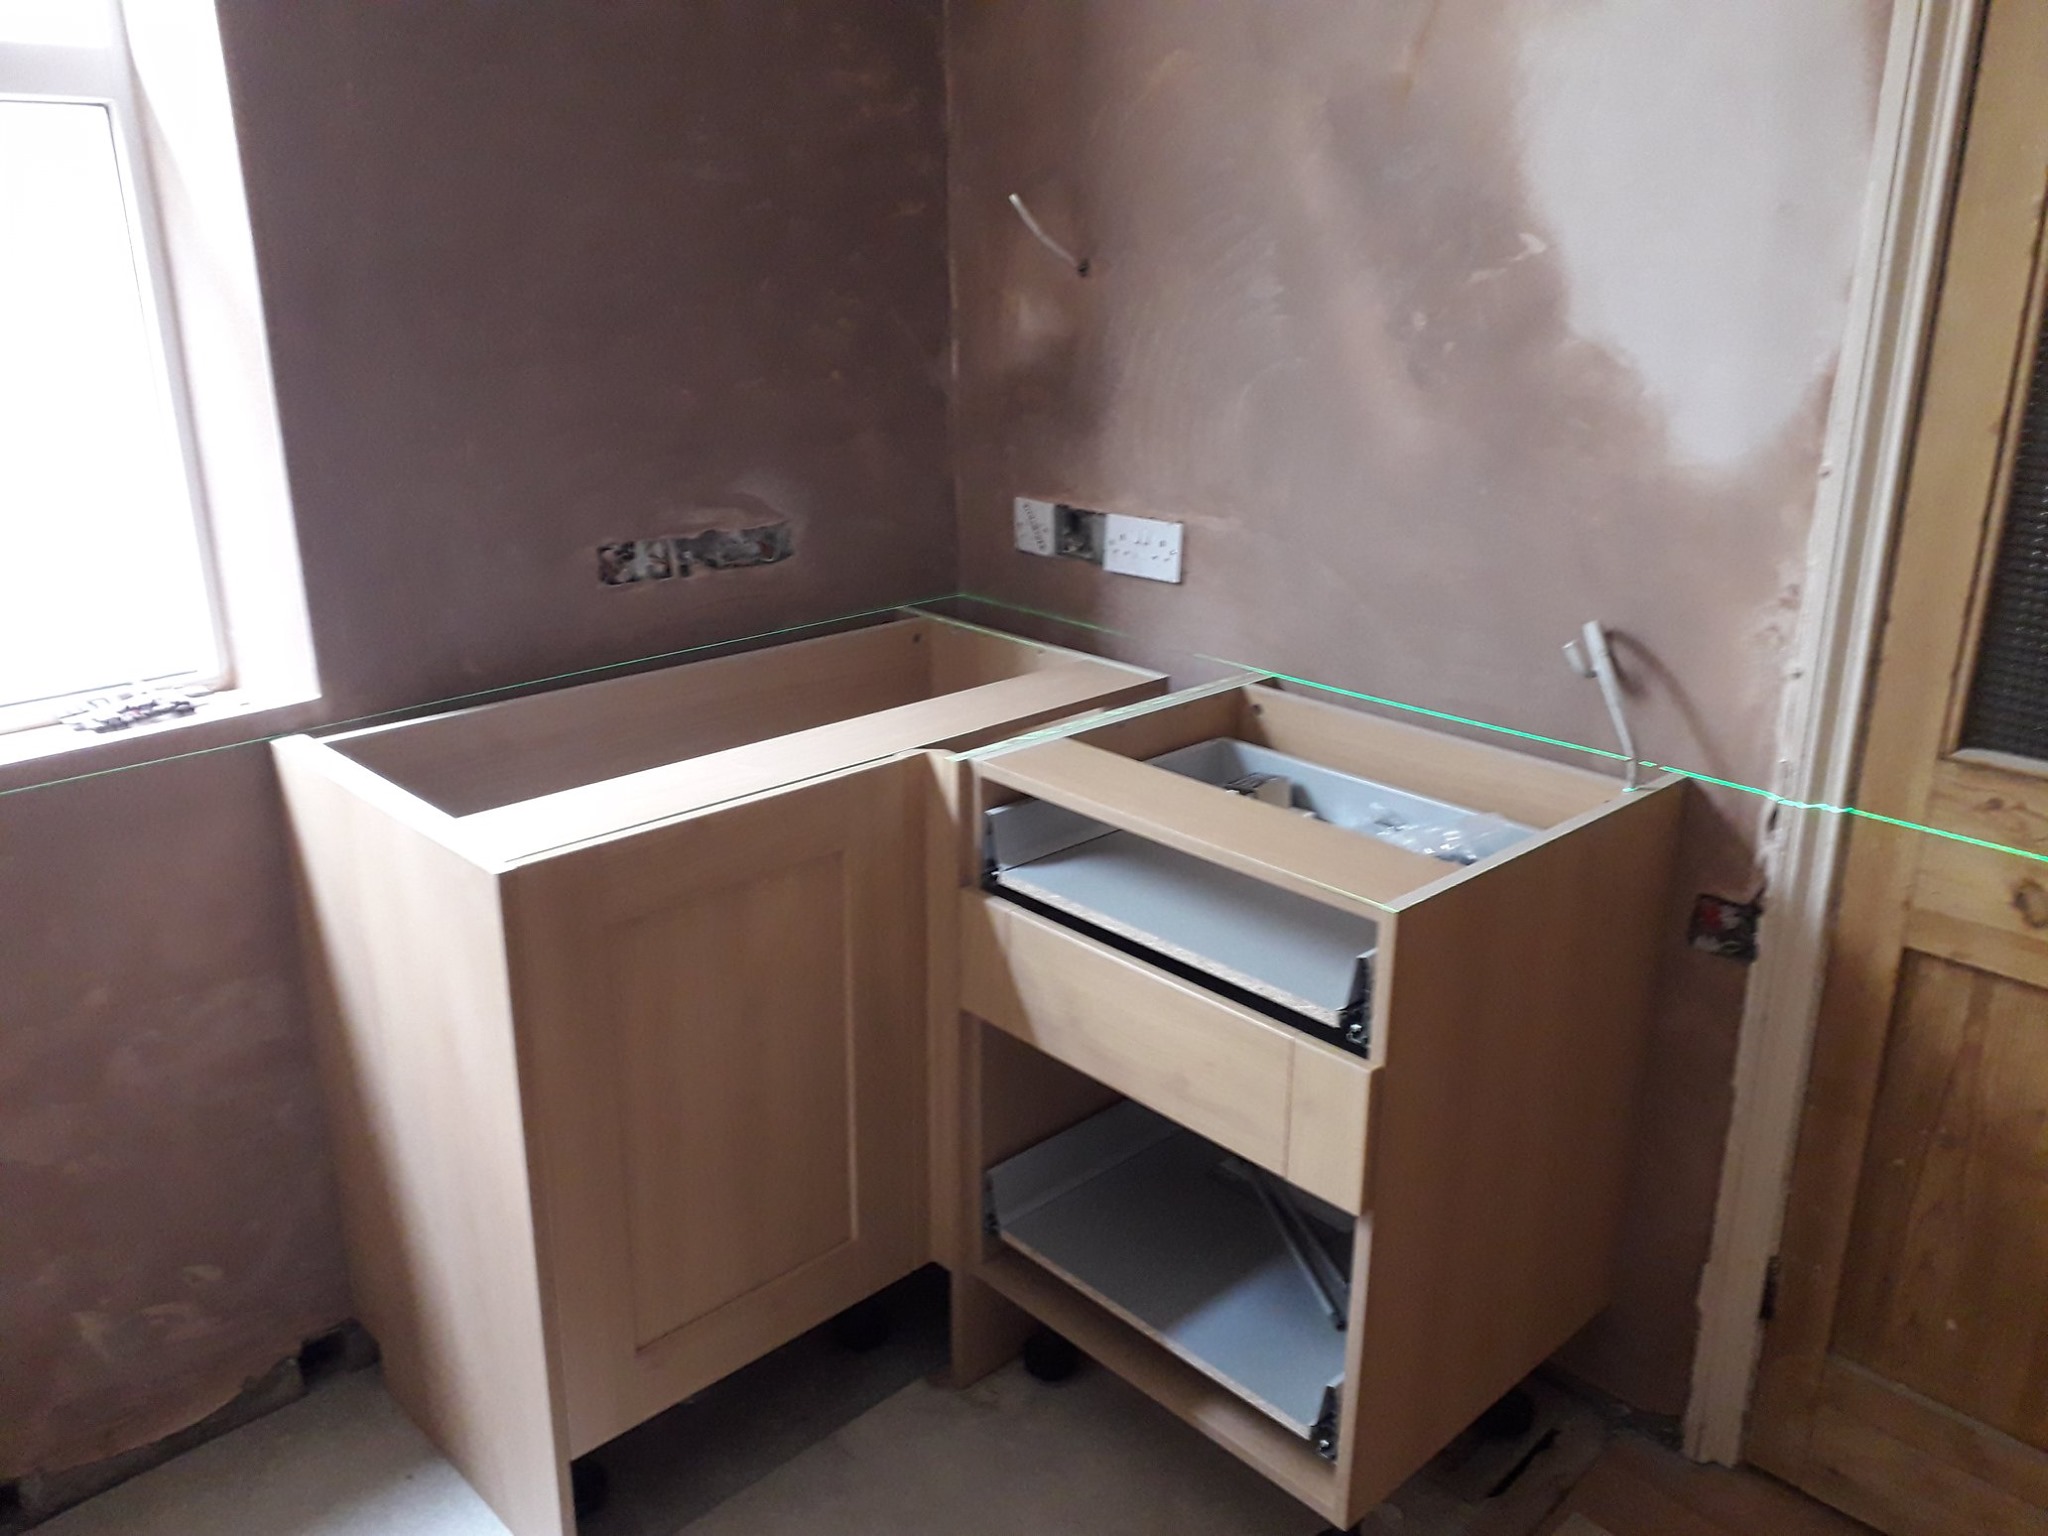 Plastered wall with new kitchen units